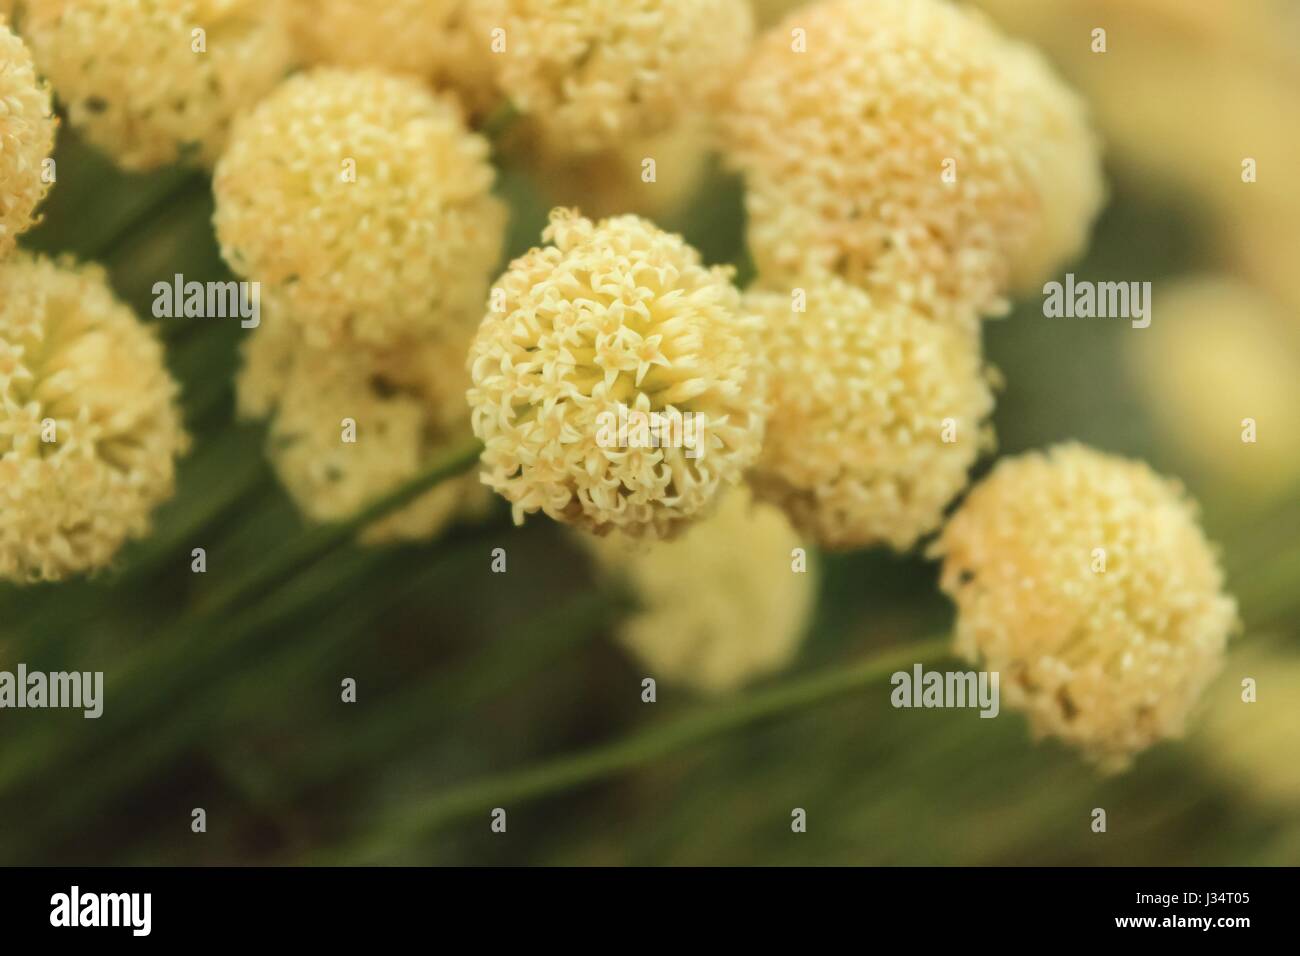 Tiny yellow flowers in spherical shape Stock Photo